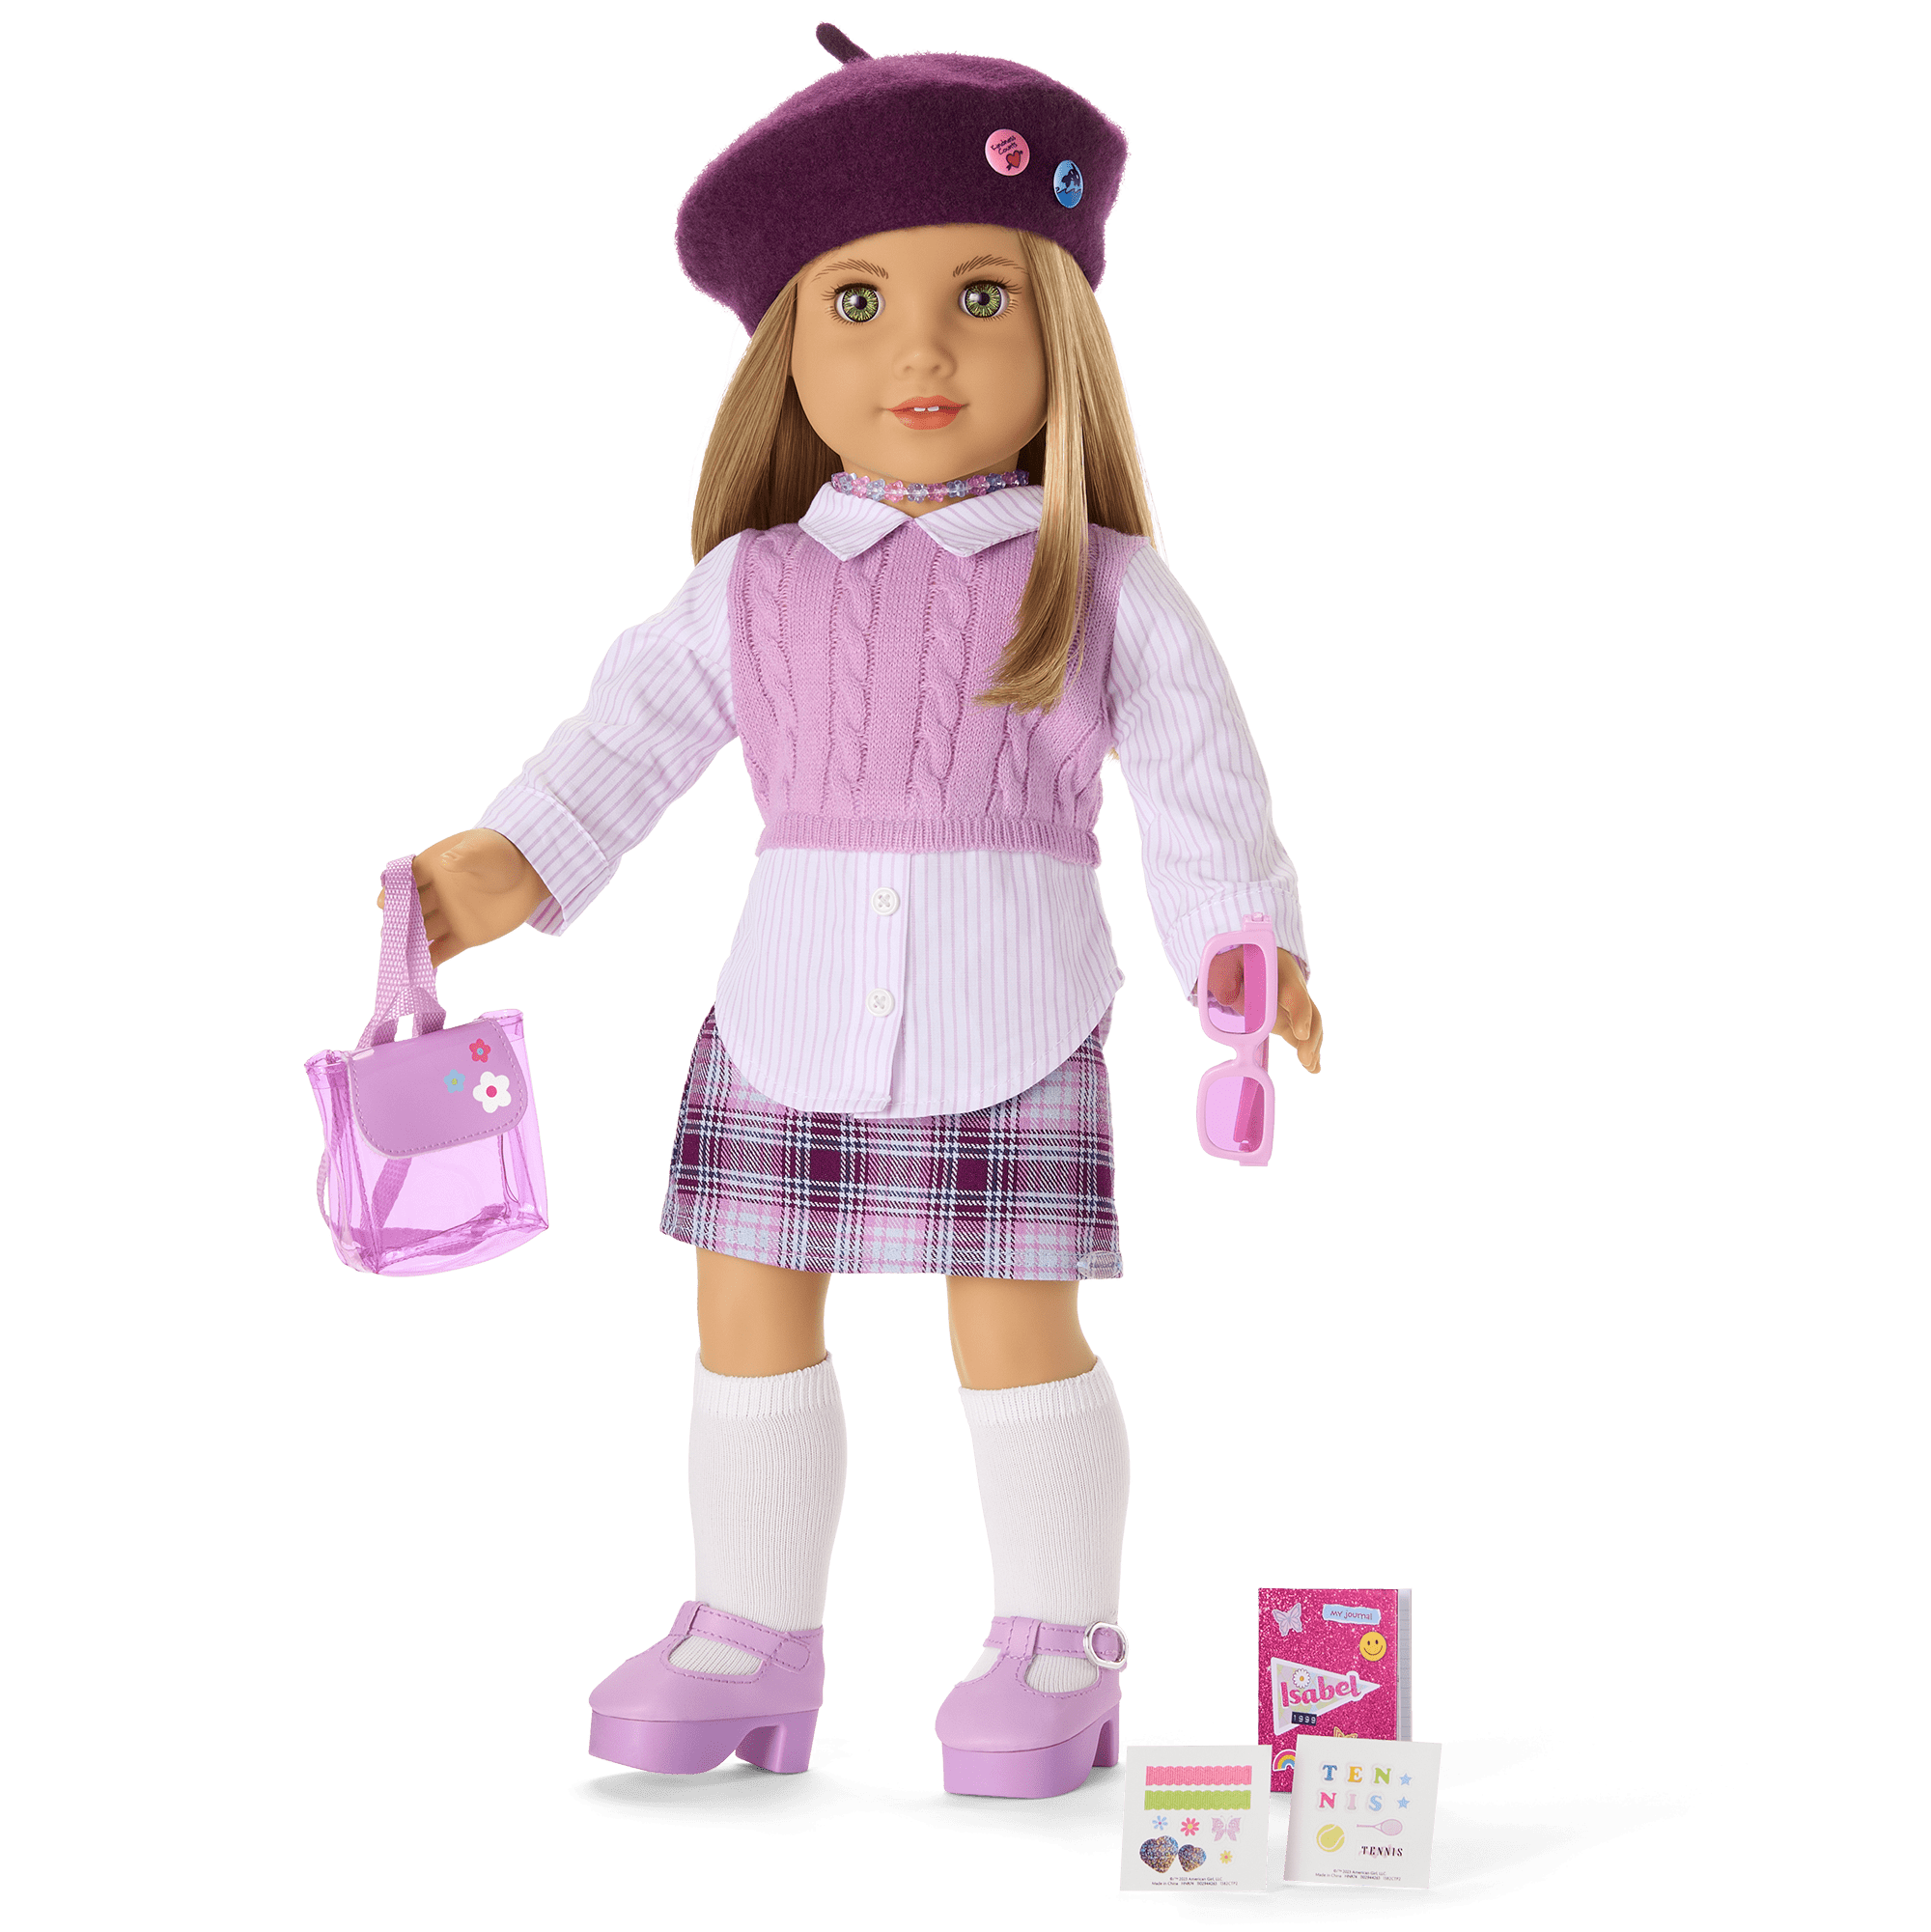 Isabel™ 18-inch Doll & Journal | American Girl®